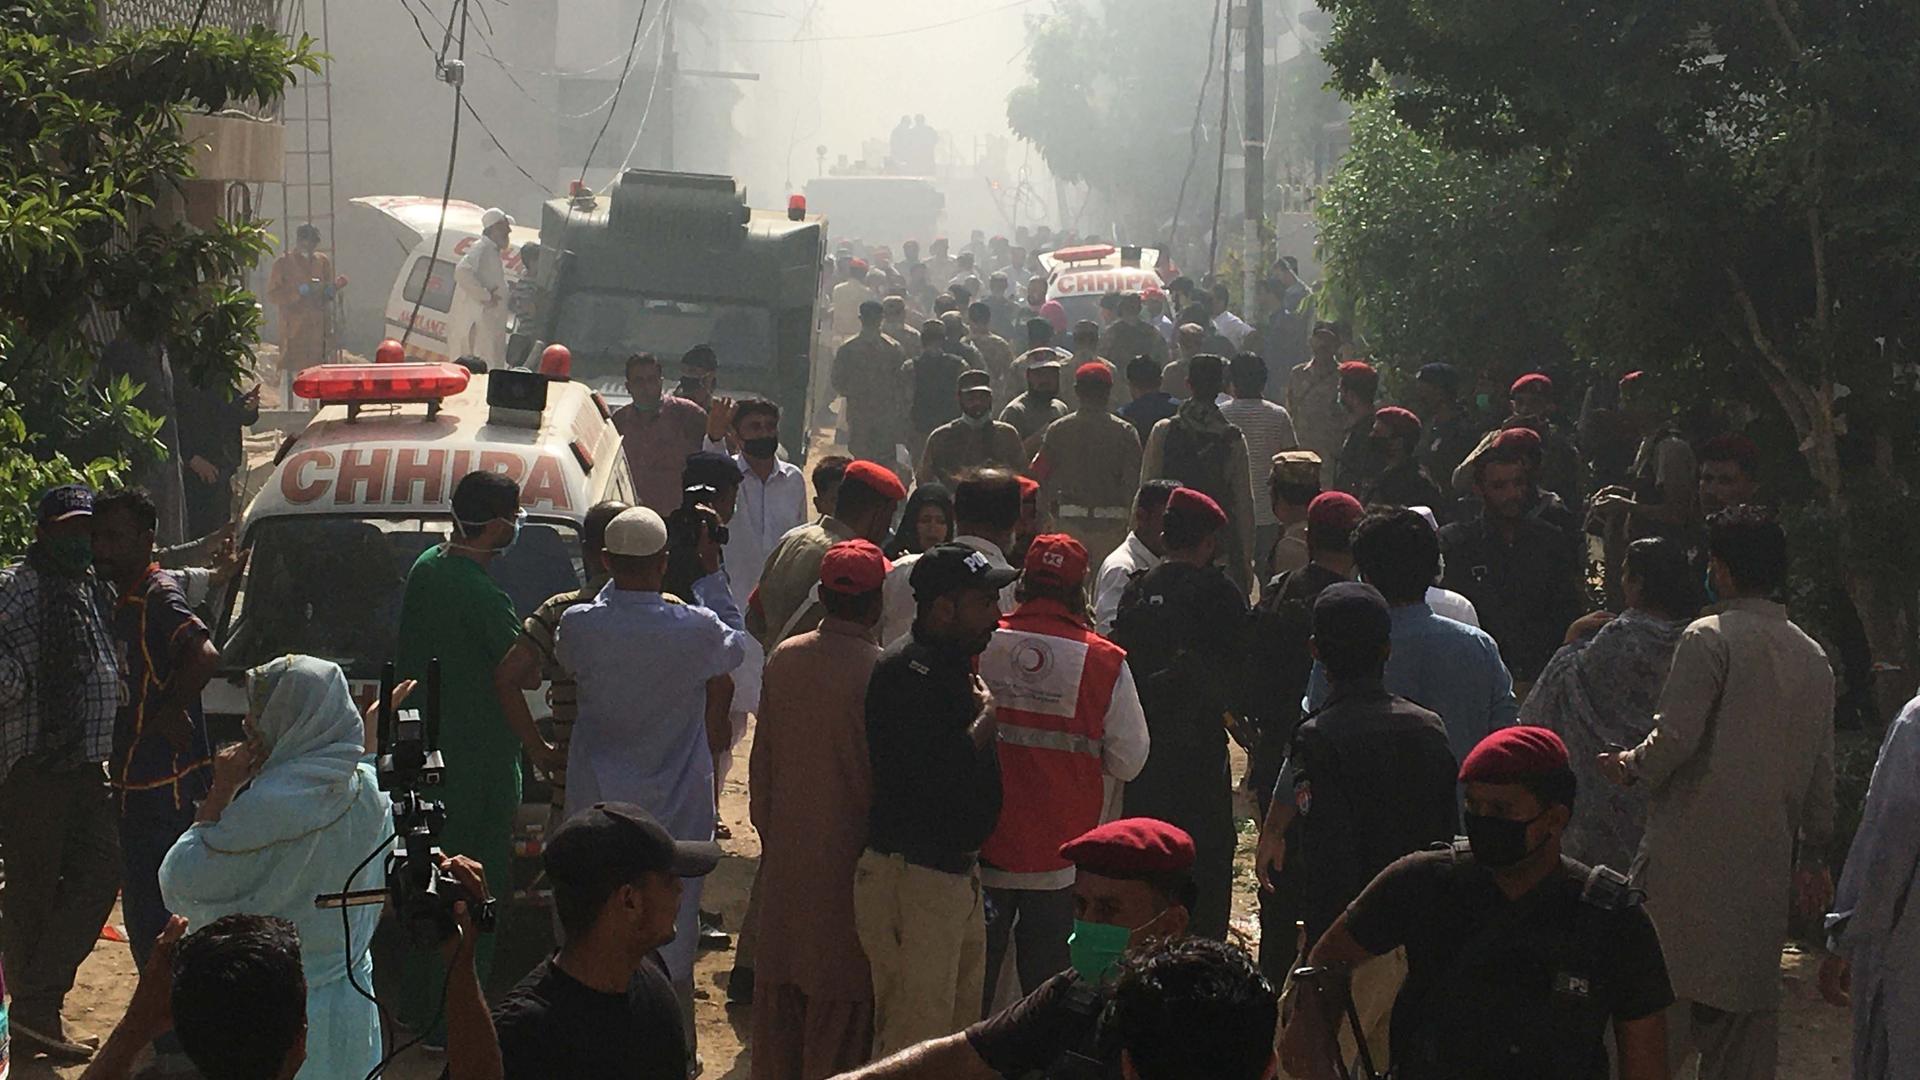 Ambulances and fire brigade vehicles gather at the site of a passenger plane crash in a residential area near an airport in Karachi, Pakistan, on May 22, 2020.